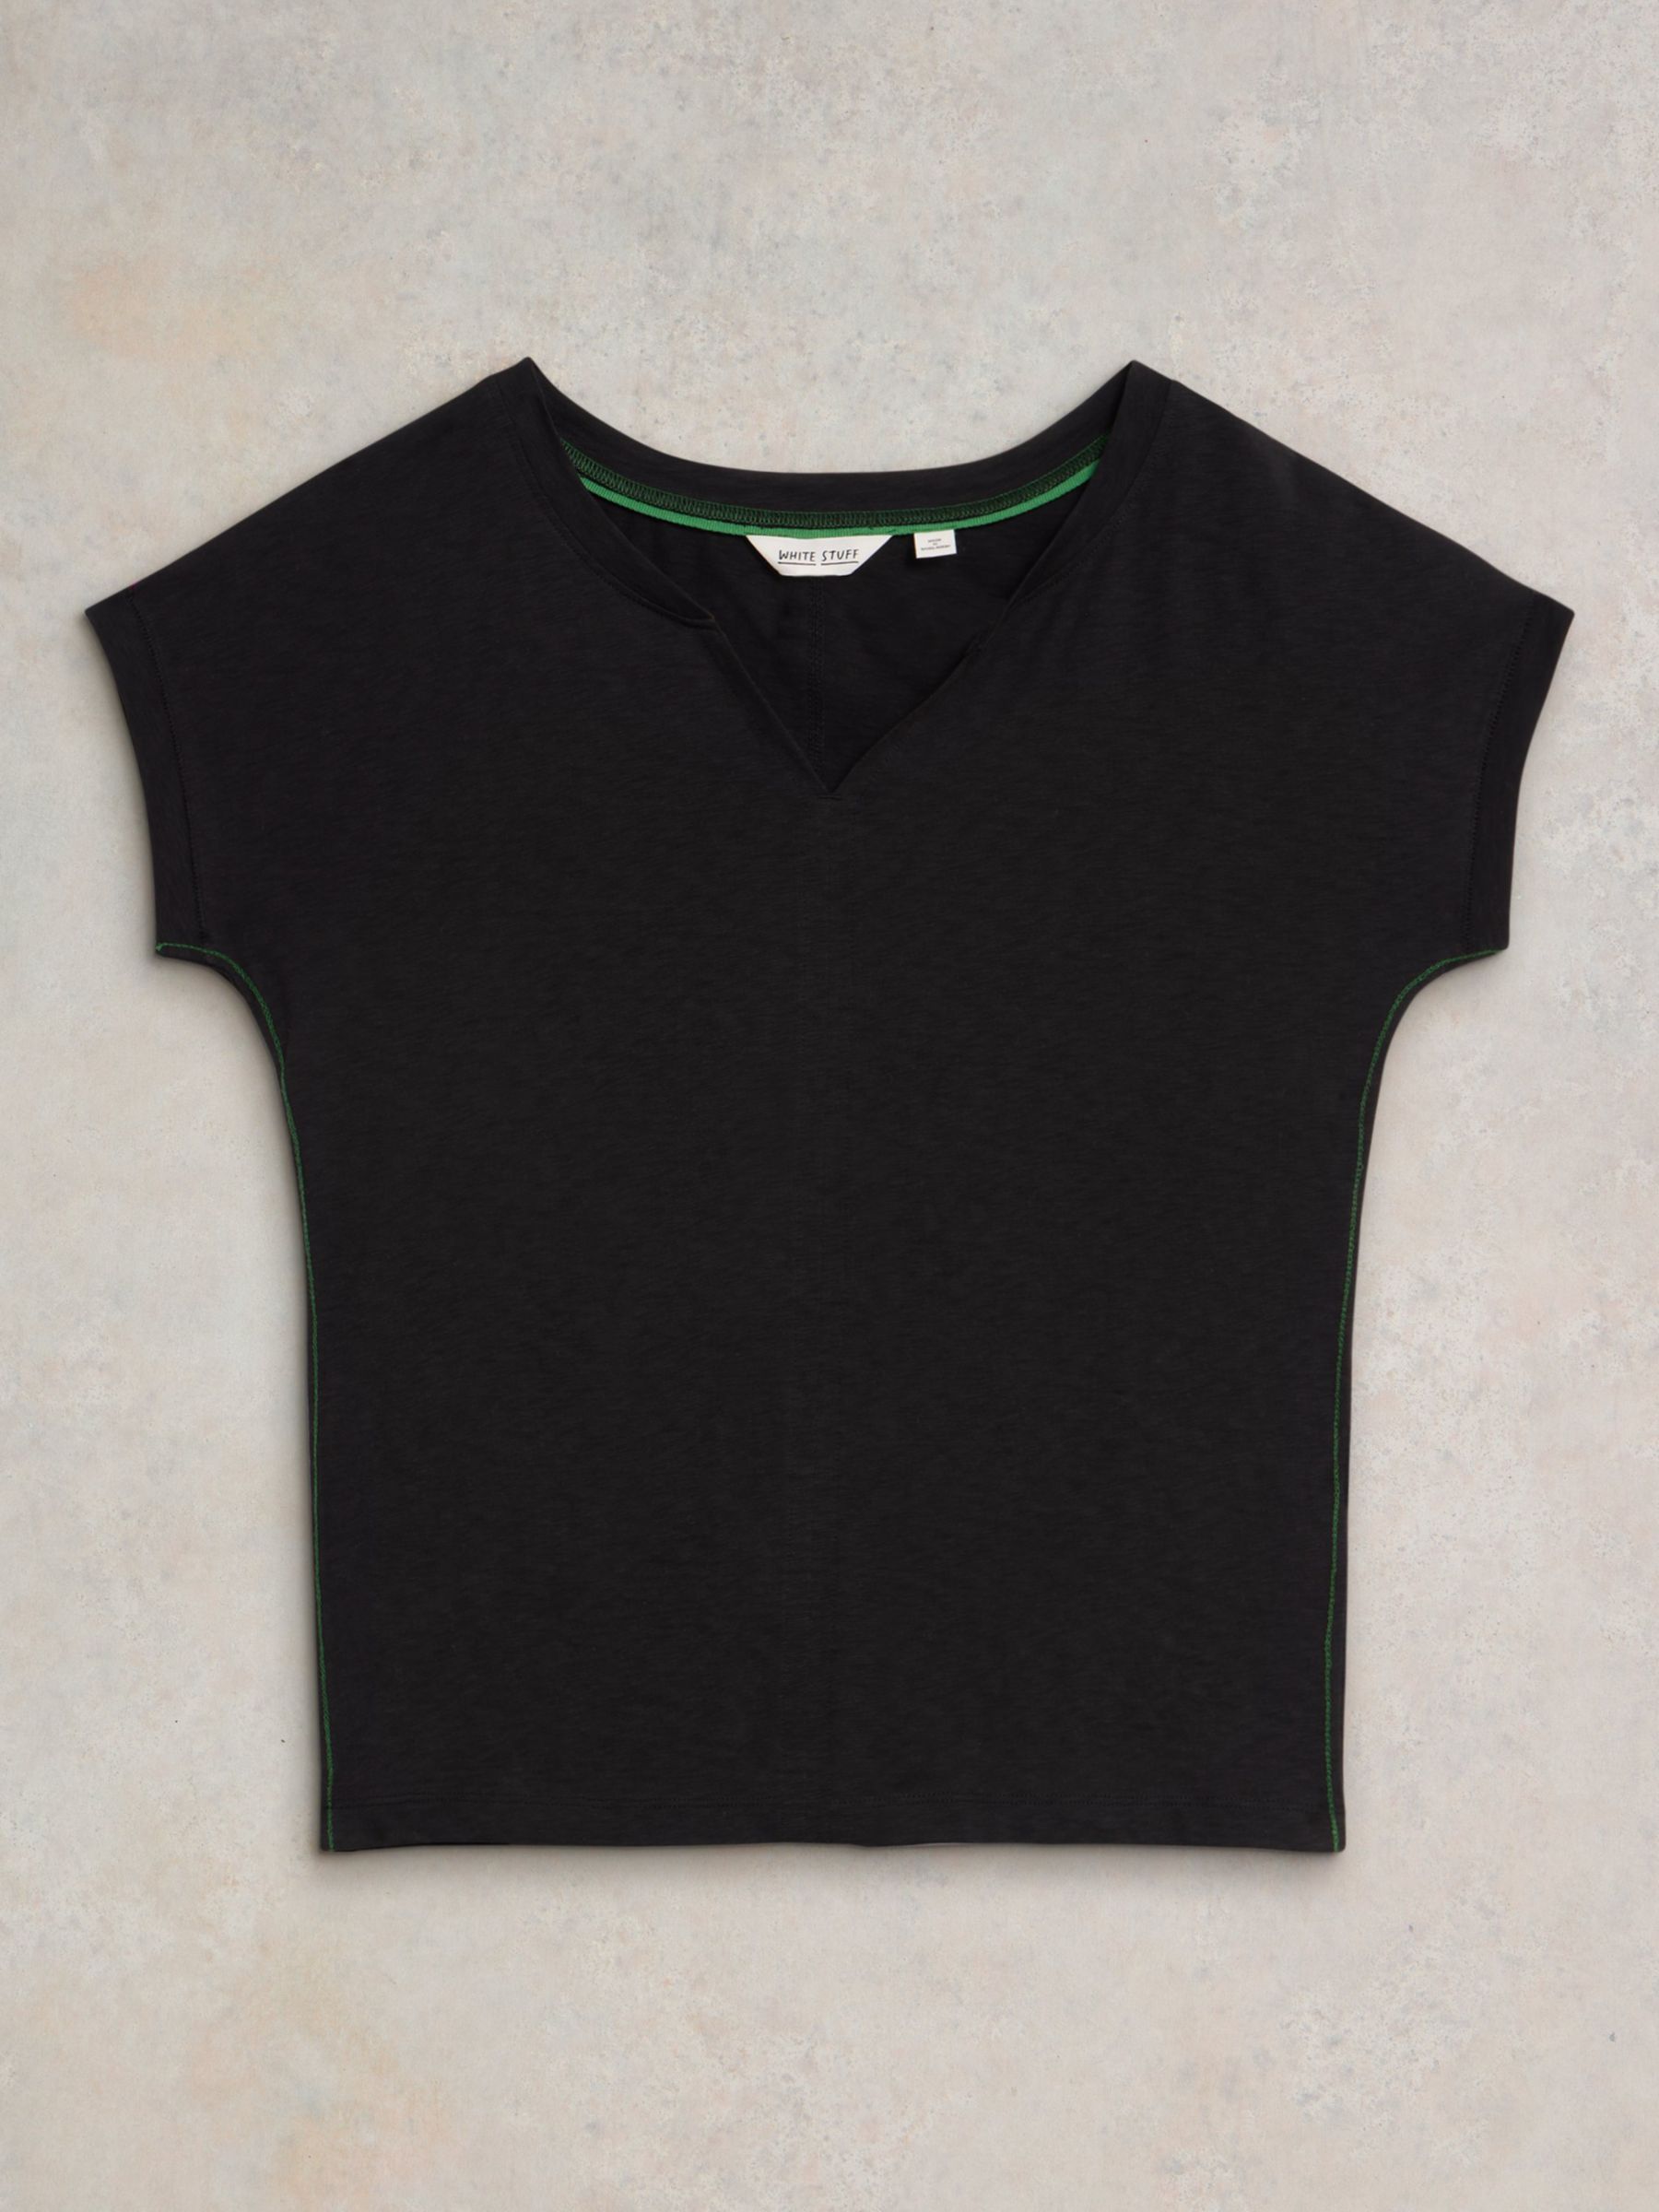 Buy Nelly Front Cross Sports Top - Black